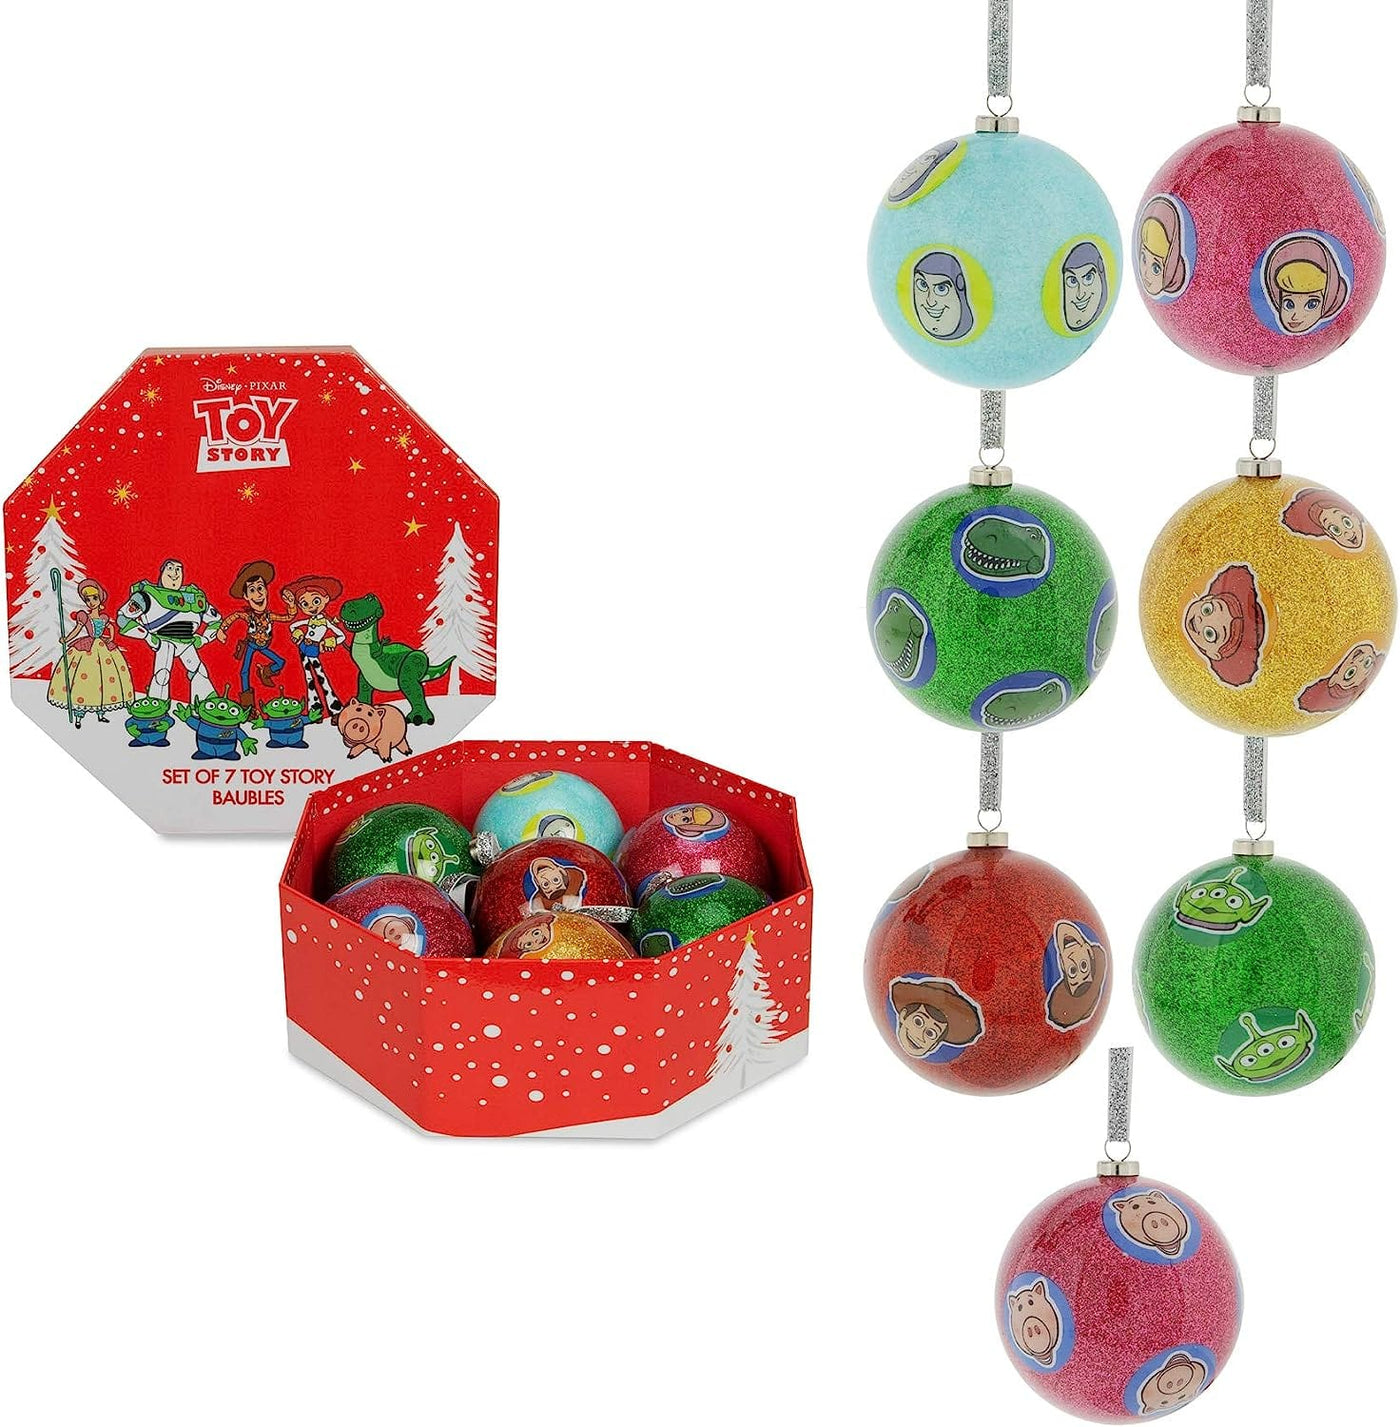 Widdop Gifts Christmas Decorations Disney Toy Story Christmas Baubles